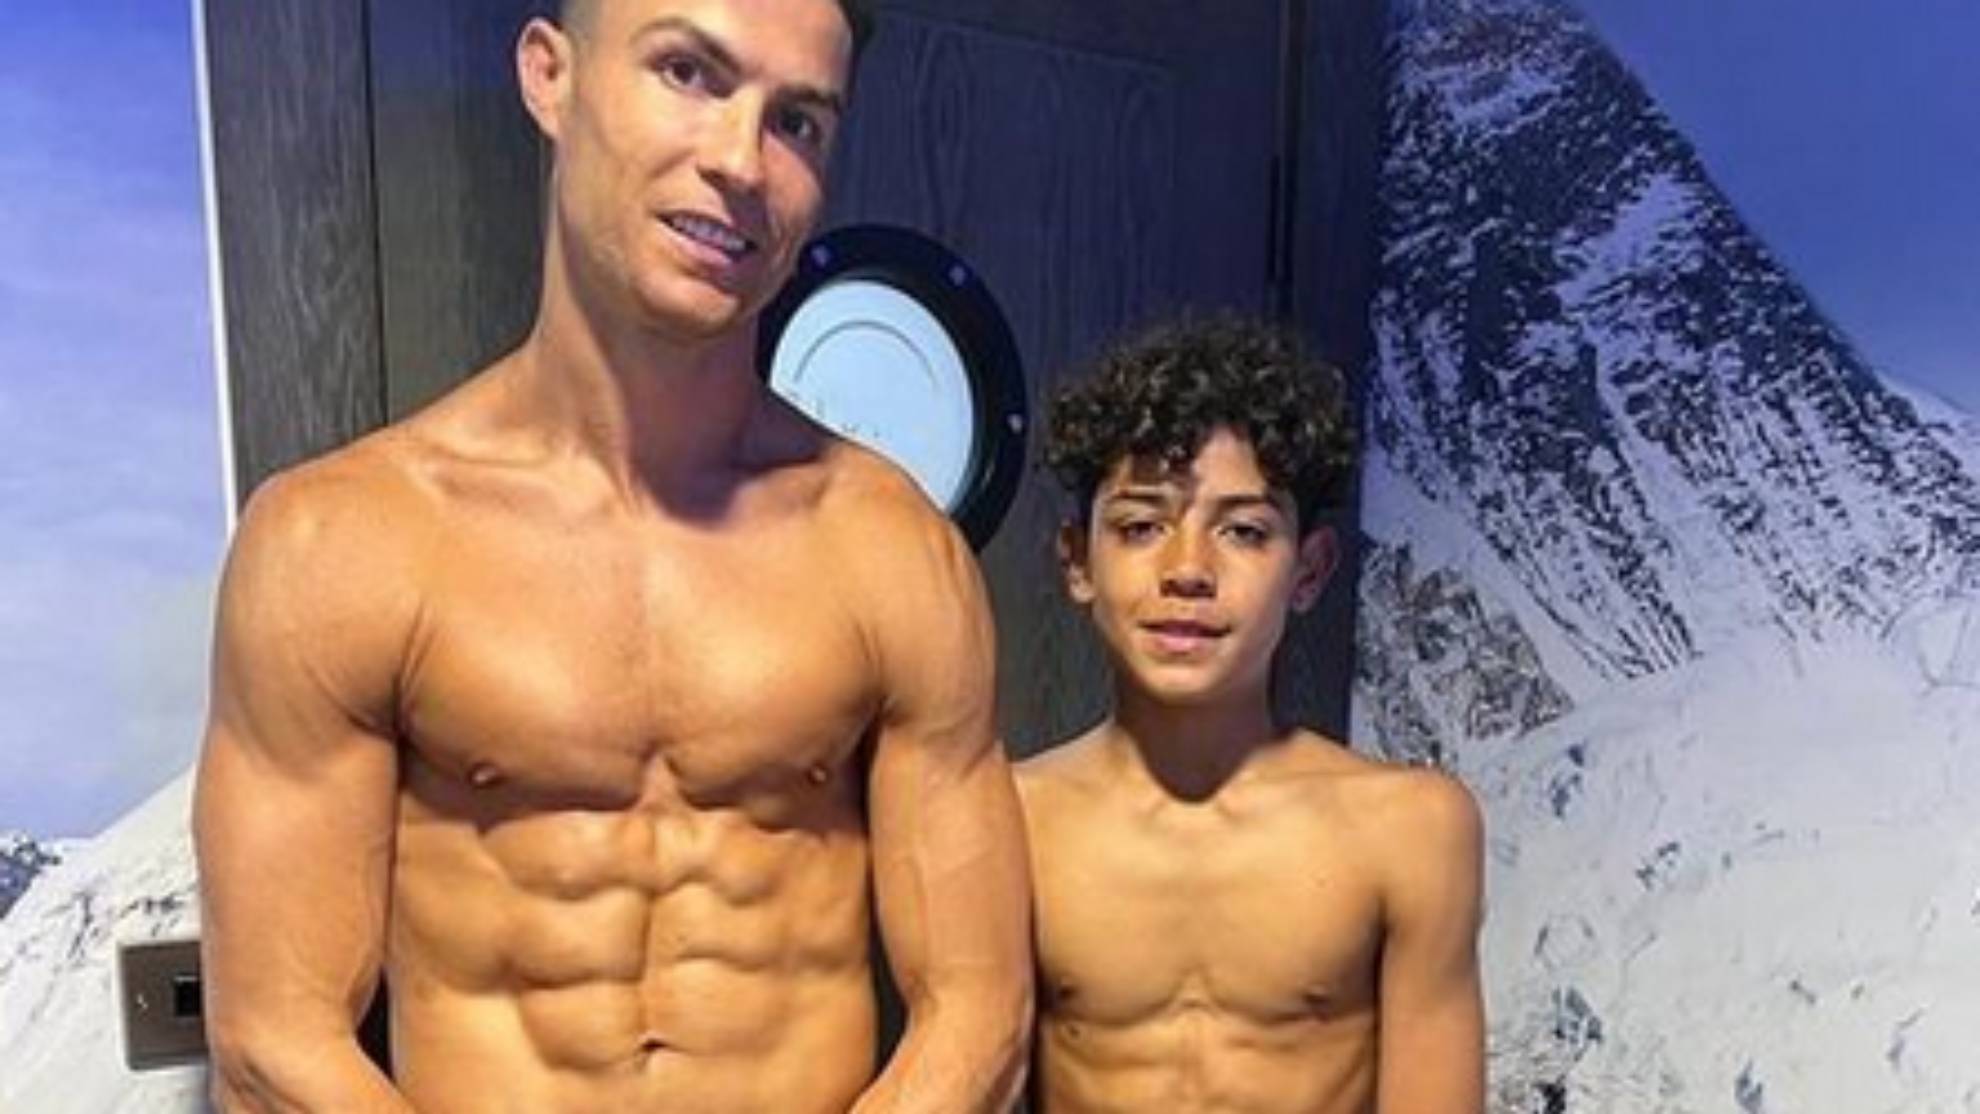 Man Utd News: Cristiano Ronaldo shows off muscles along with 11-year-old son - Marca